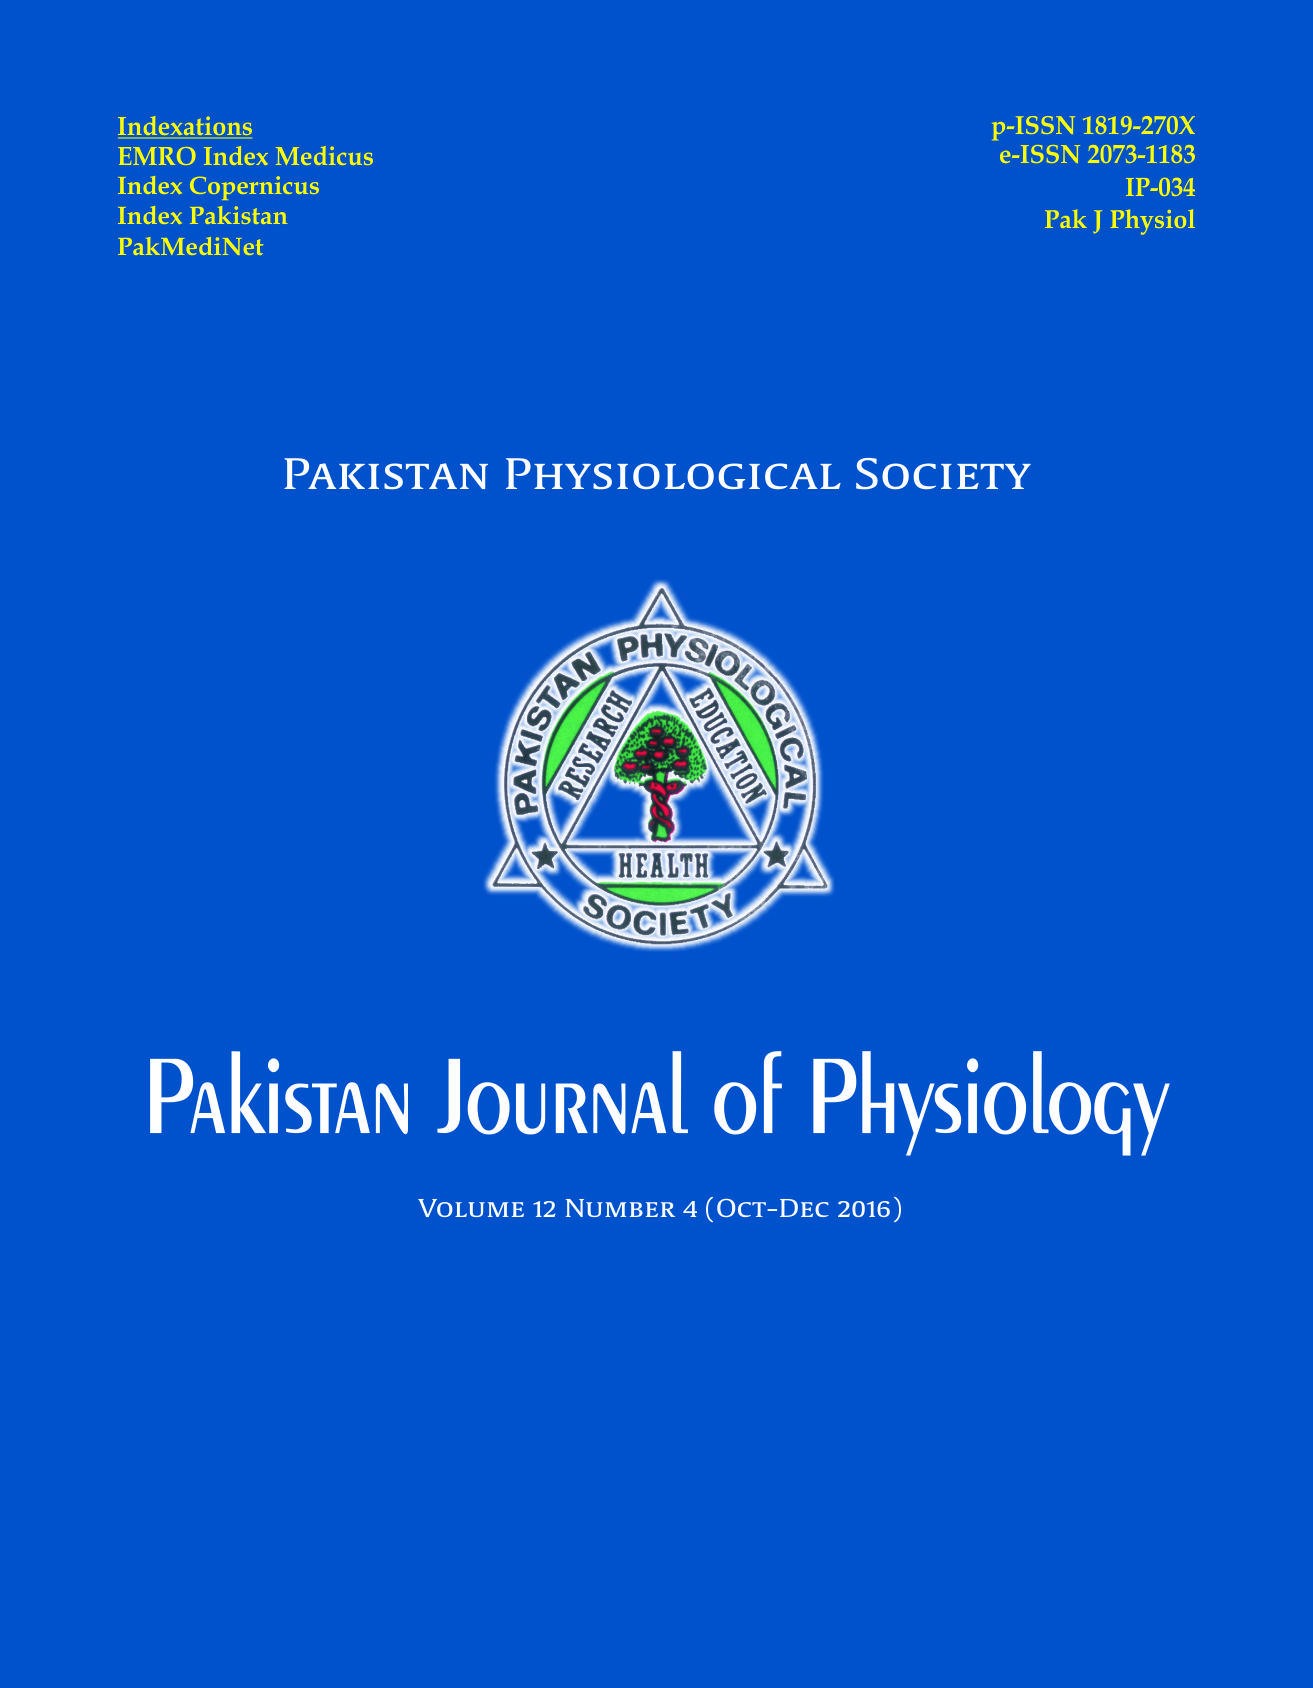 					View Vol. 12 No. 4 (2016): Pakistan Journal of Physiology
				